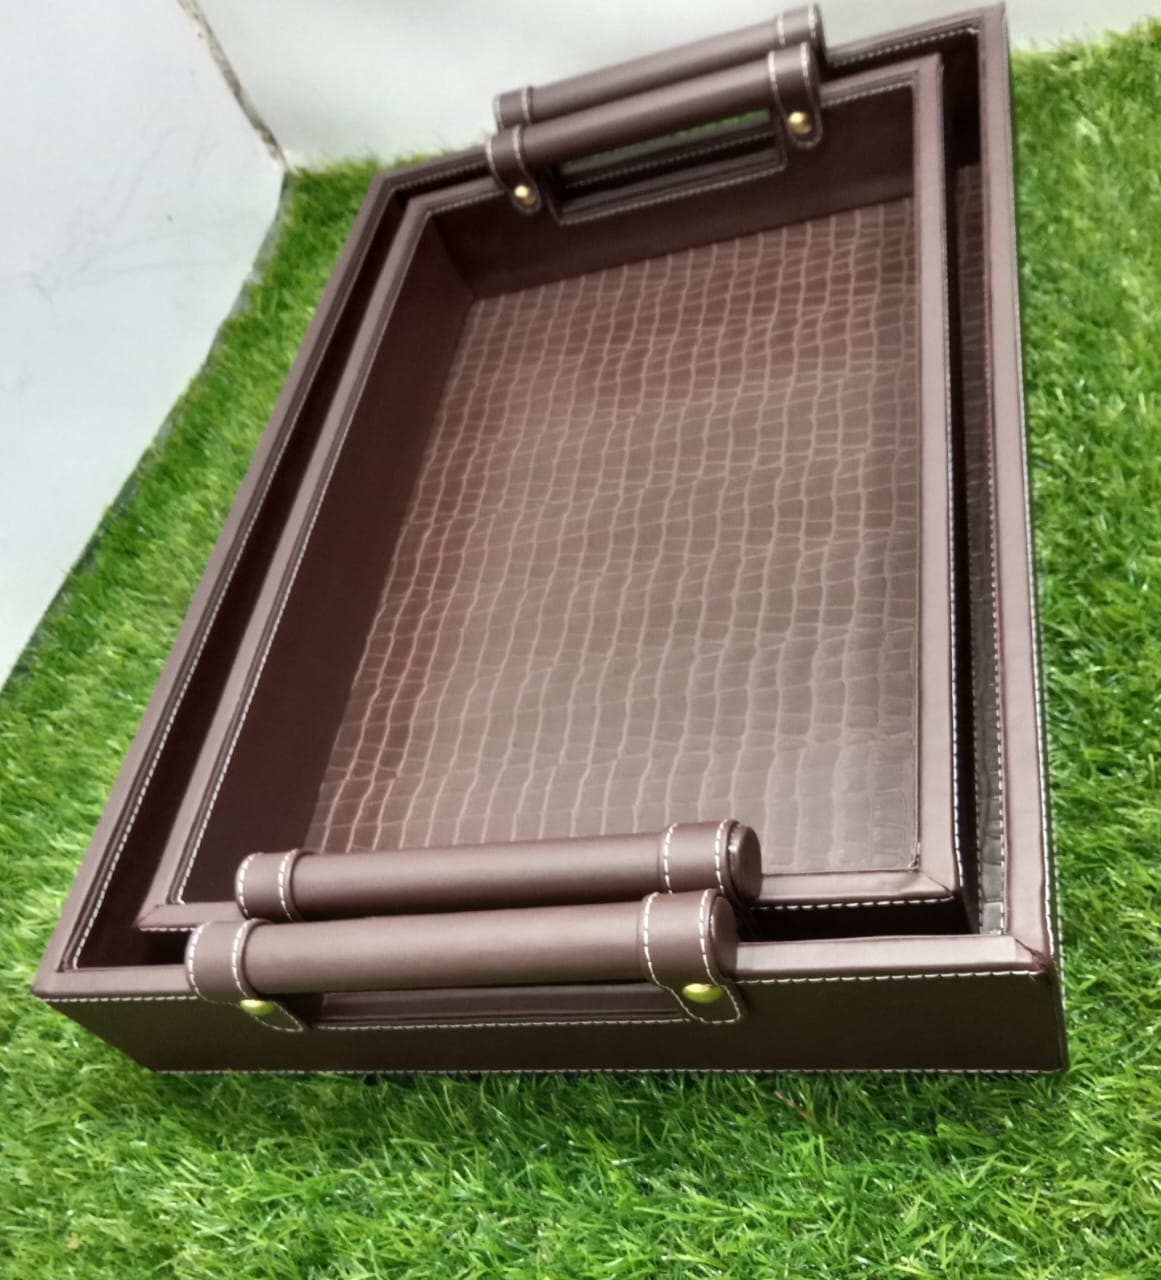 Exclusive Design Leather Trays